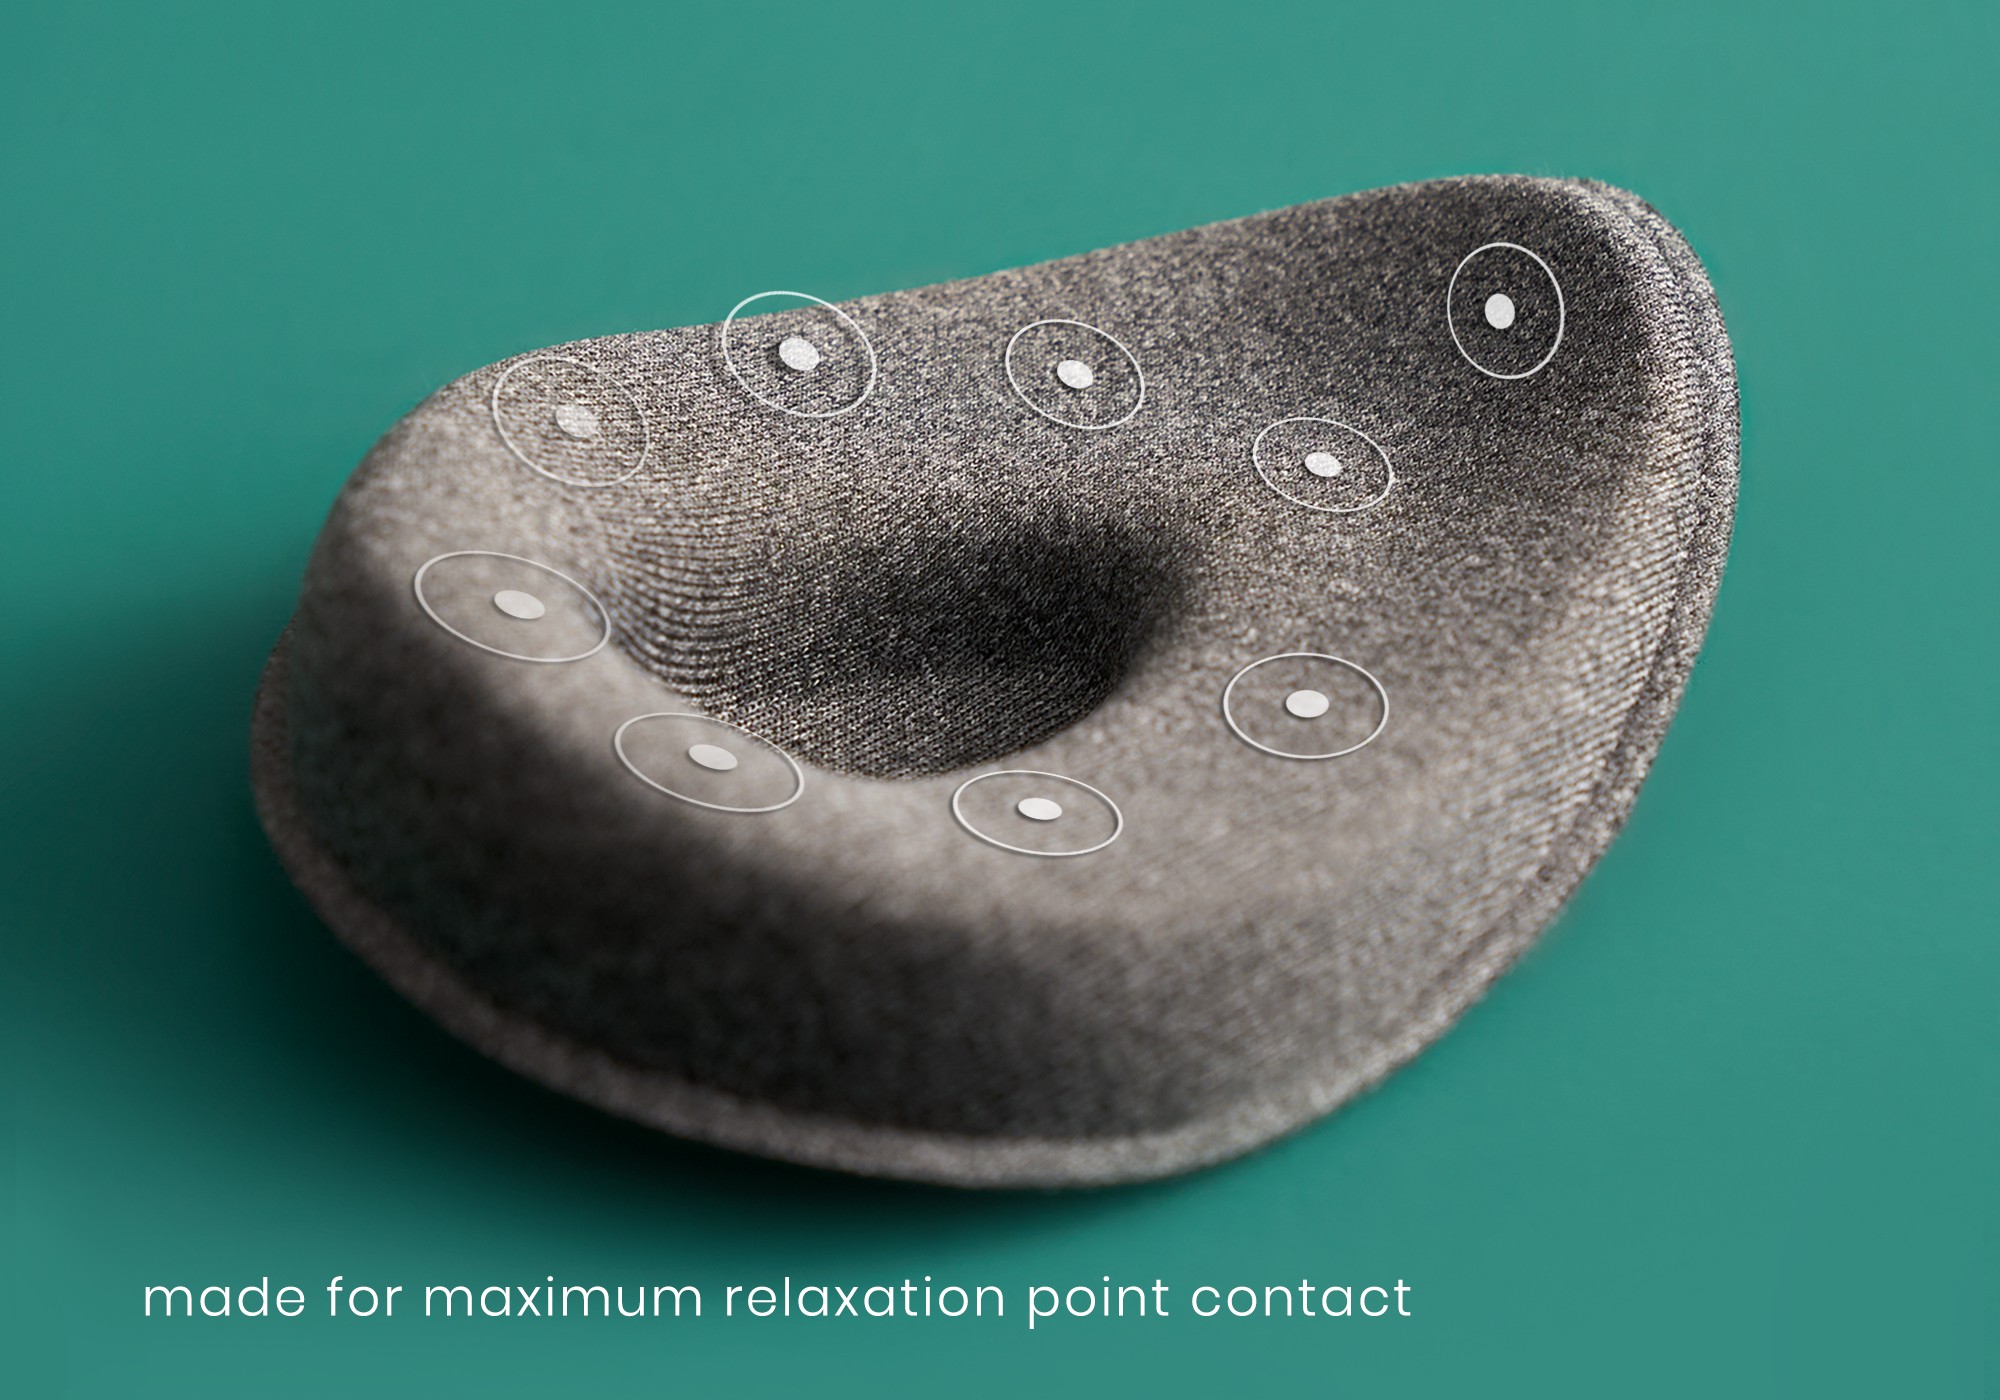 A tapered eye cup of a weighted sleep mask with an indentation in its center and white circles to indicate pressure points.